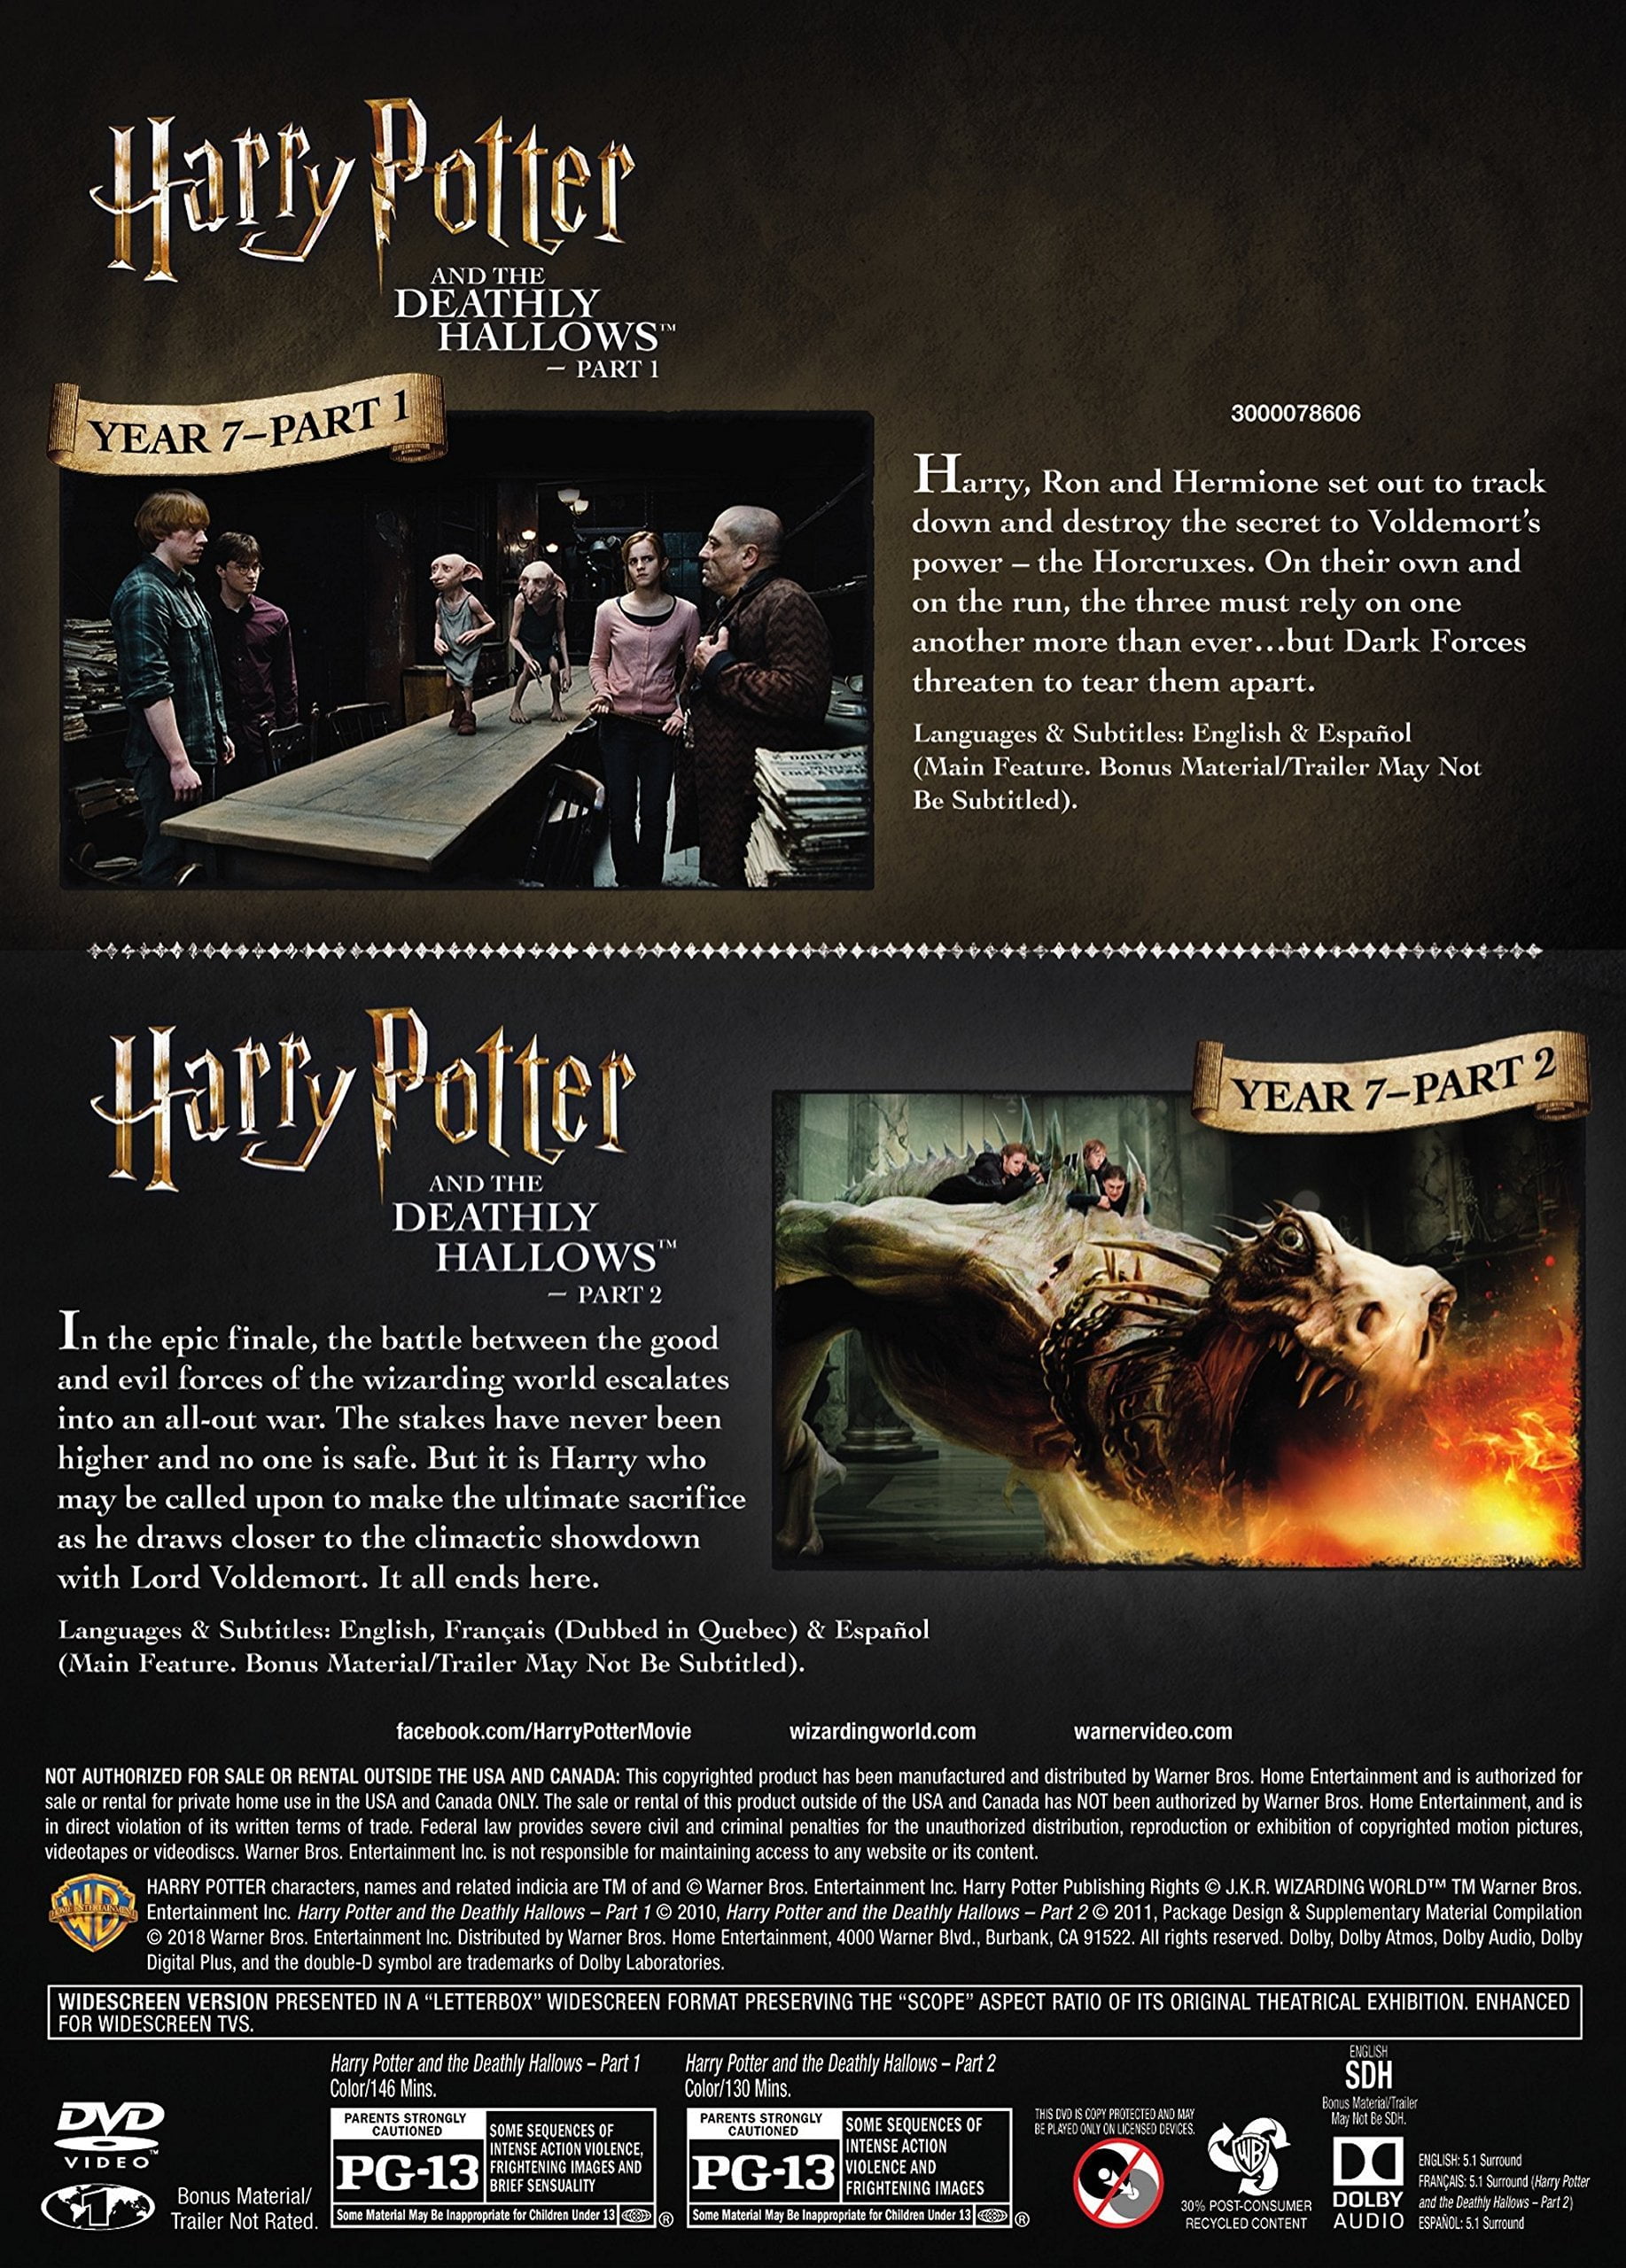 watch harry potter and the deathly hallows pt 2 megavideo